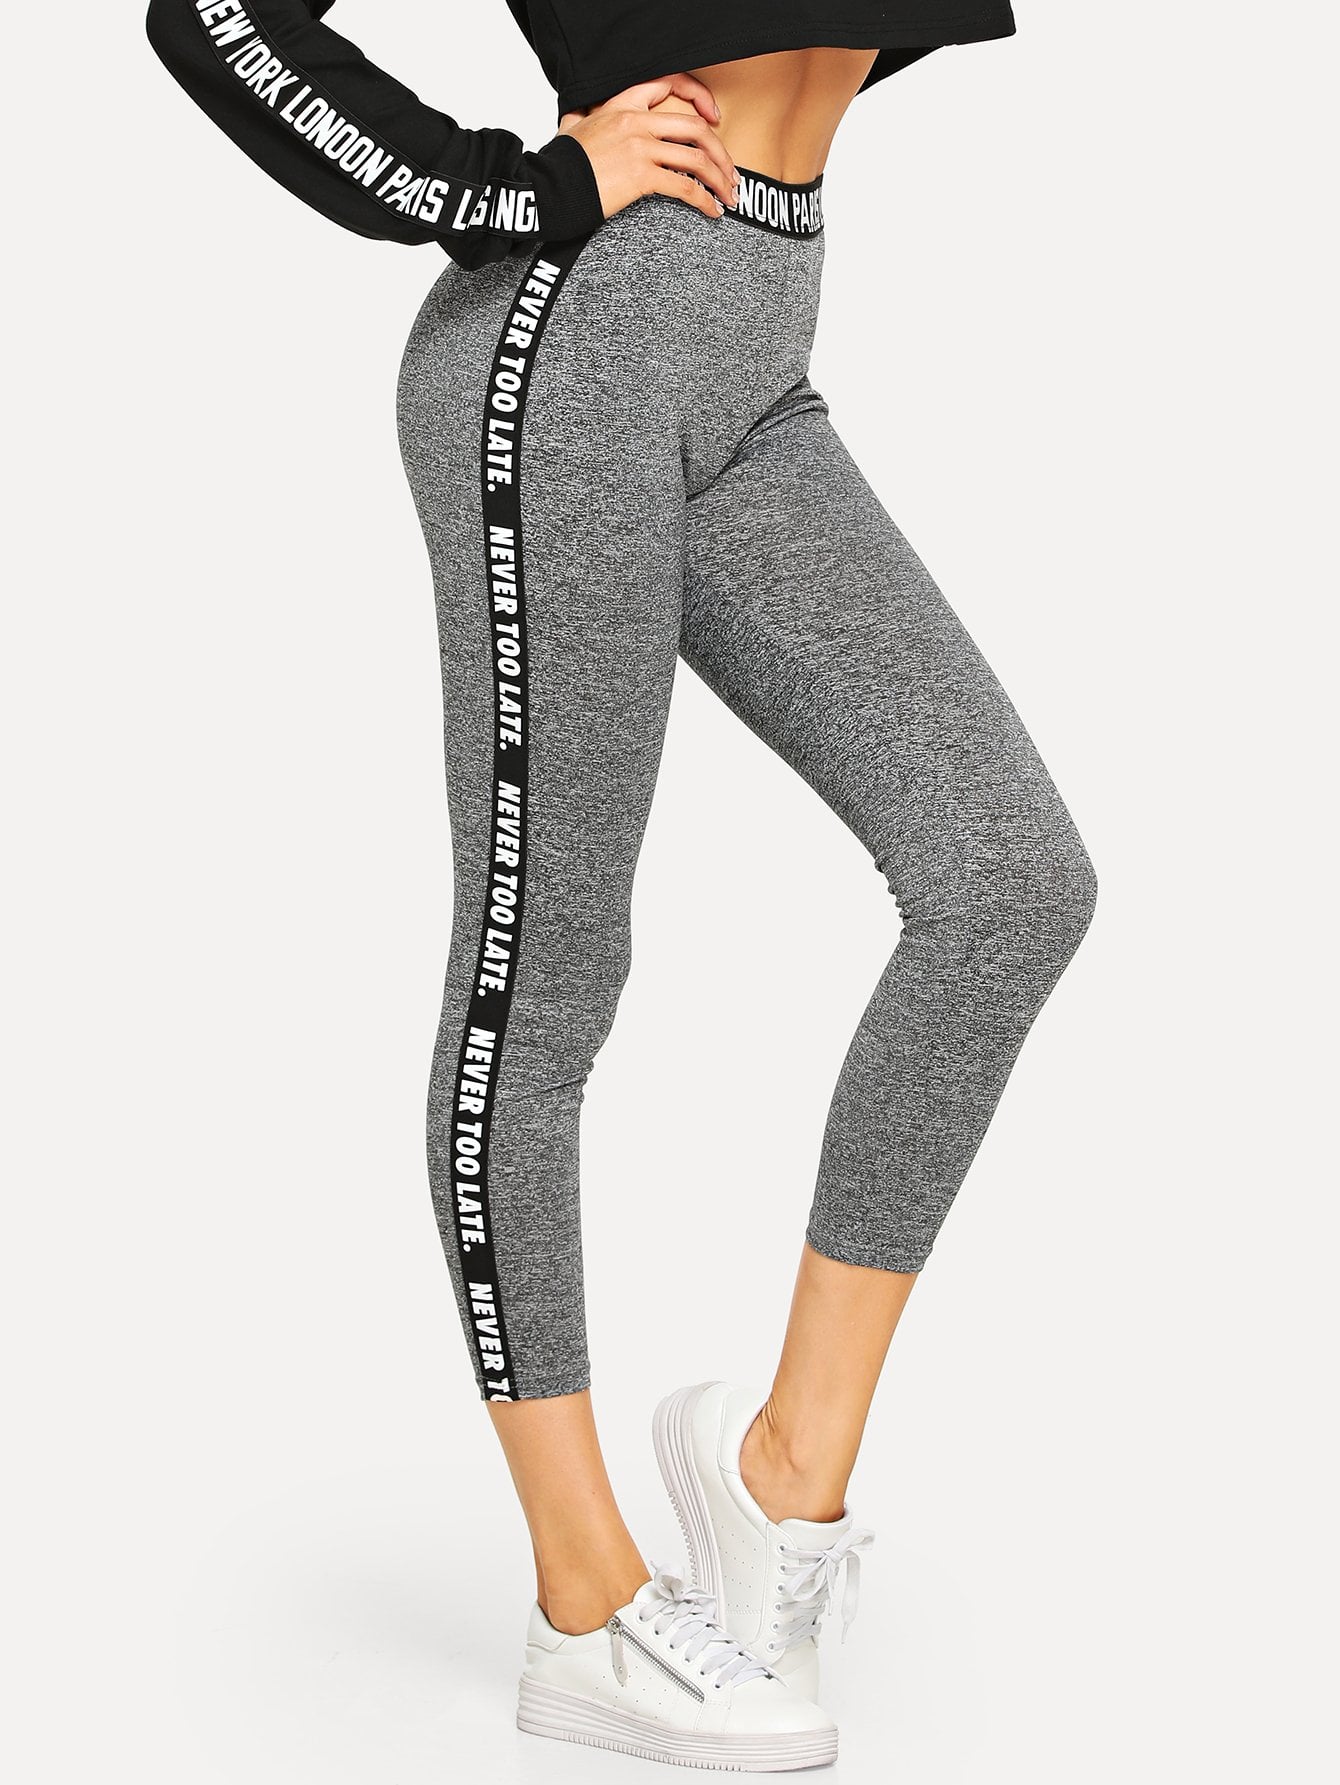 2019 Classic Stylish Legging with Tap Side